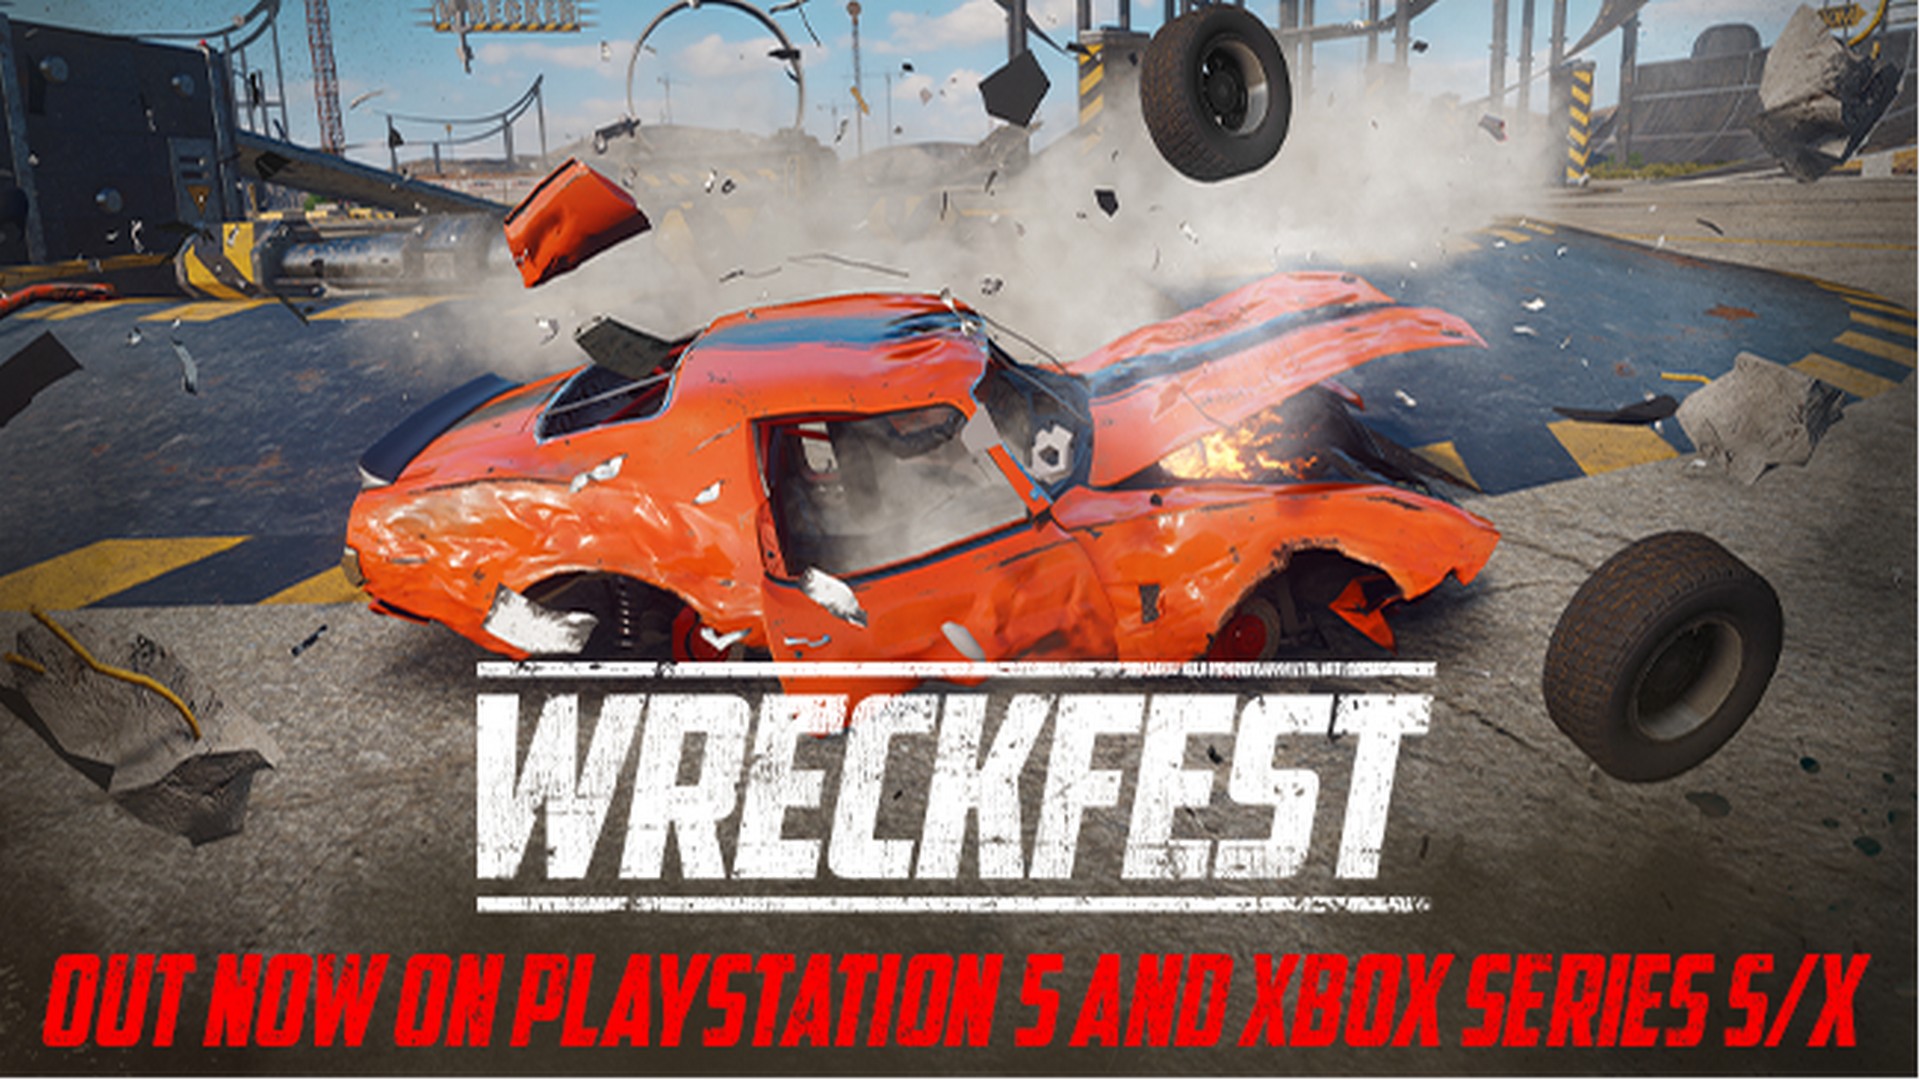 Wreckfest Is Out Now On Xbox Series S|X And PlayStation 5